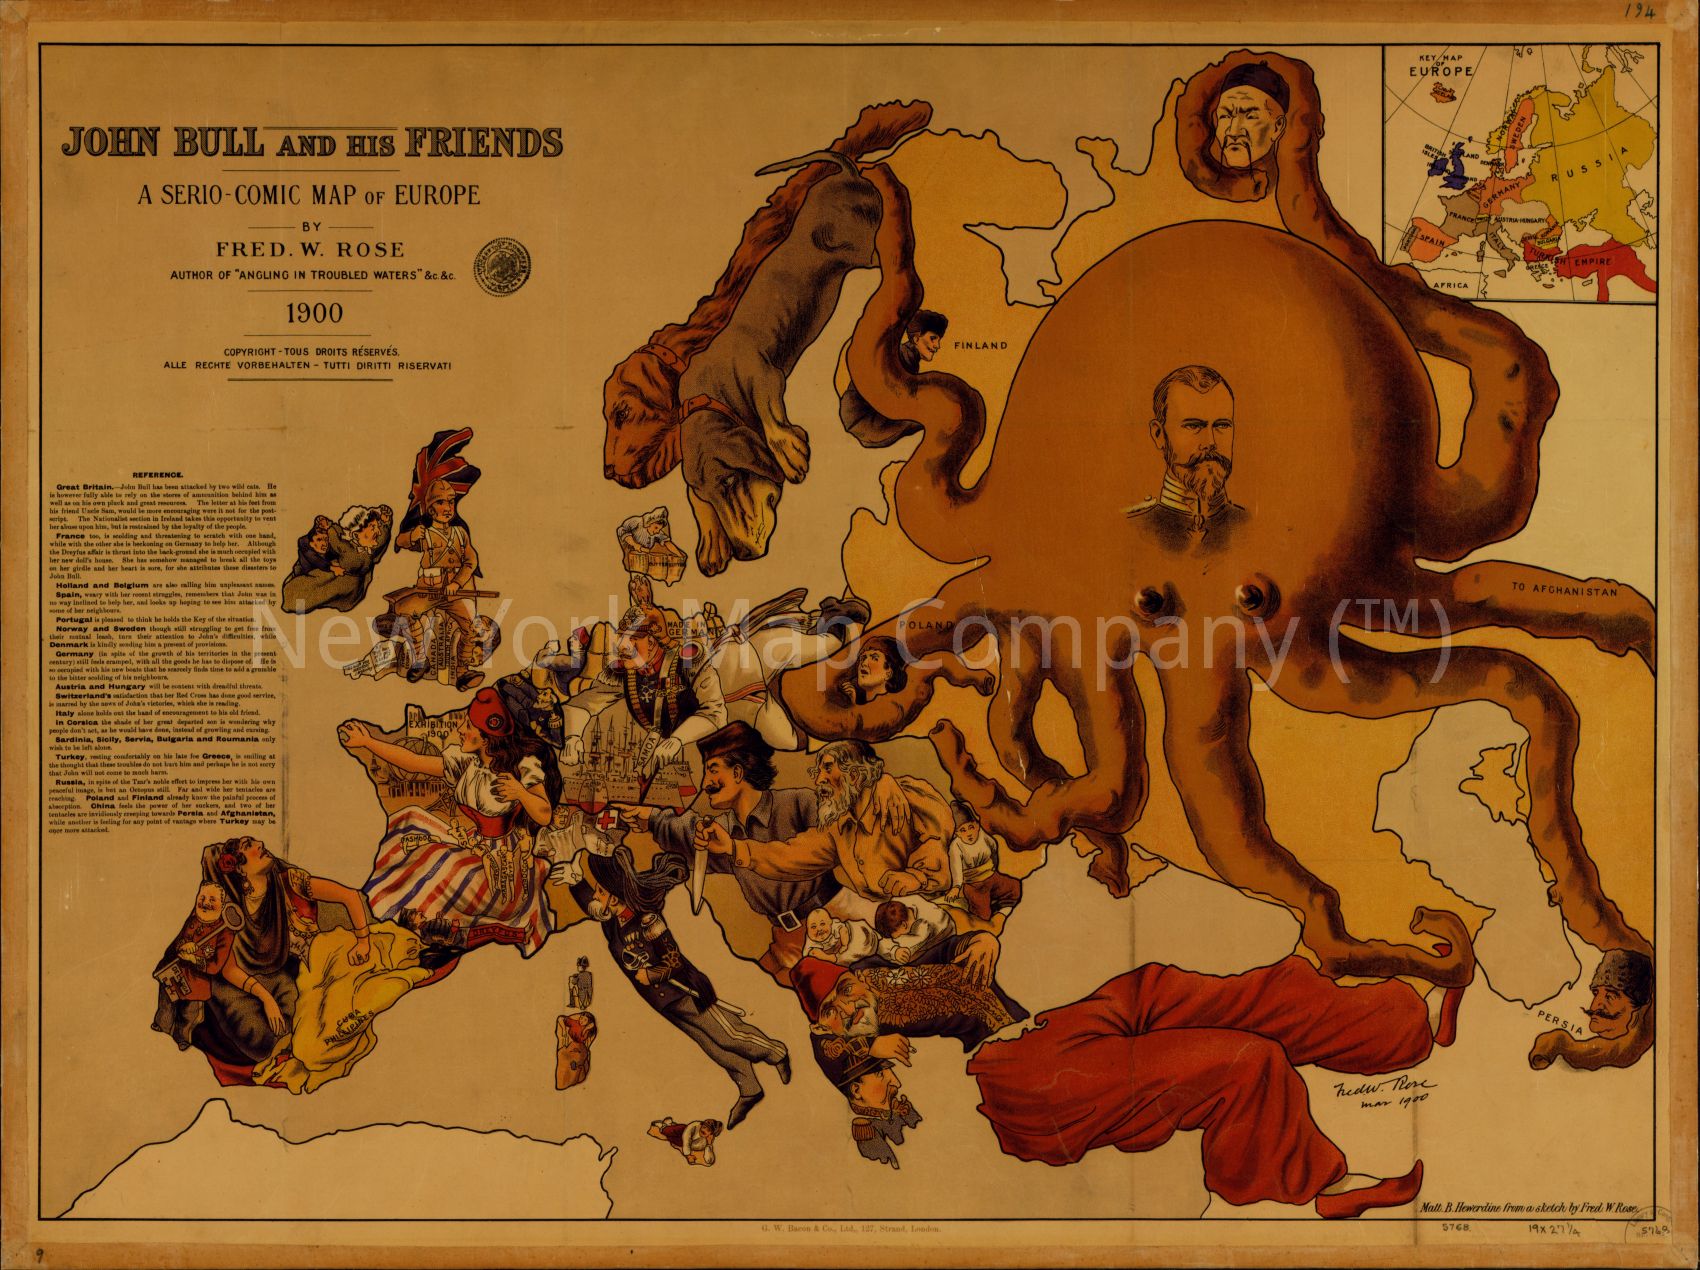 1900 map John Bull and his friends: a serio-comic map of Europe. Map Subjects: Europe | History